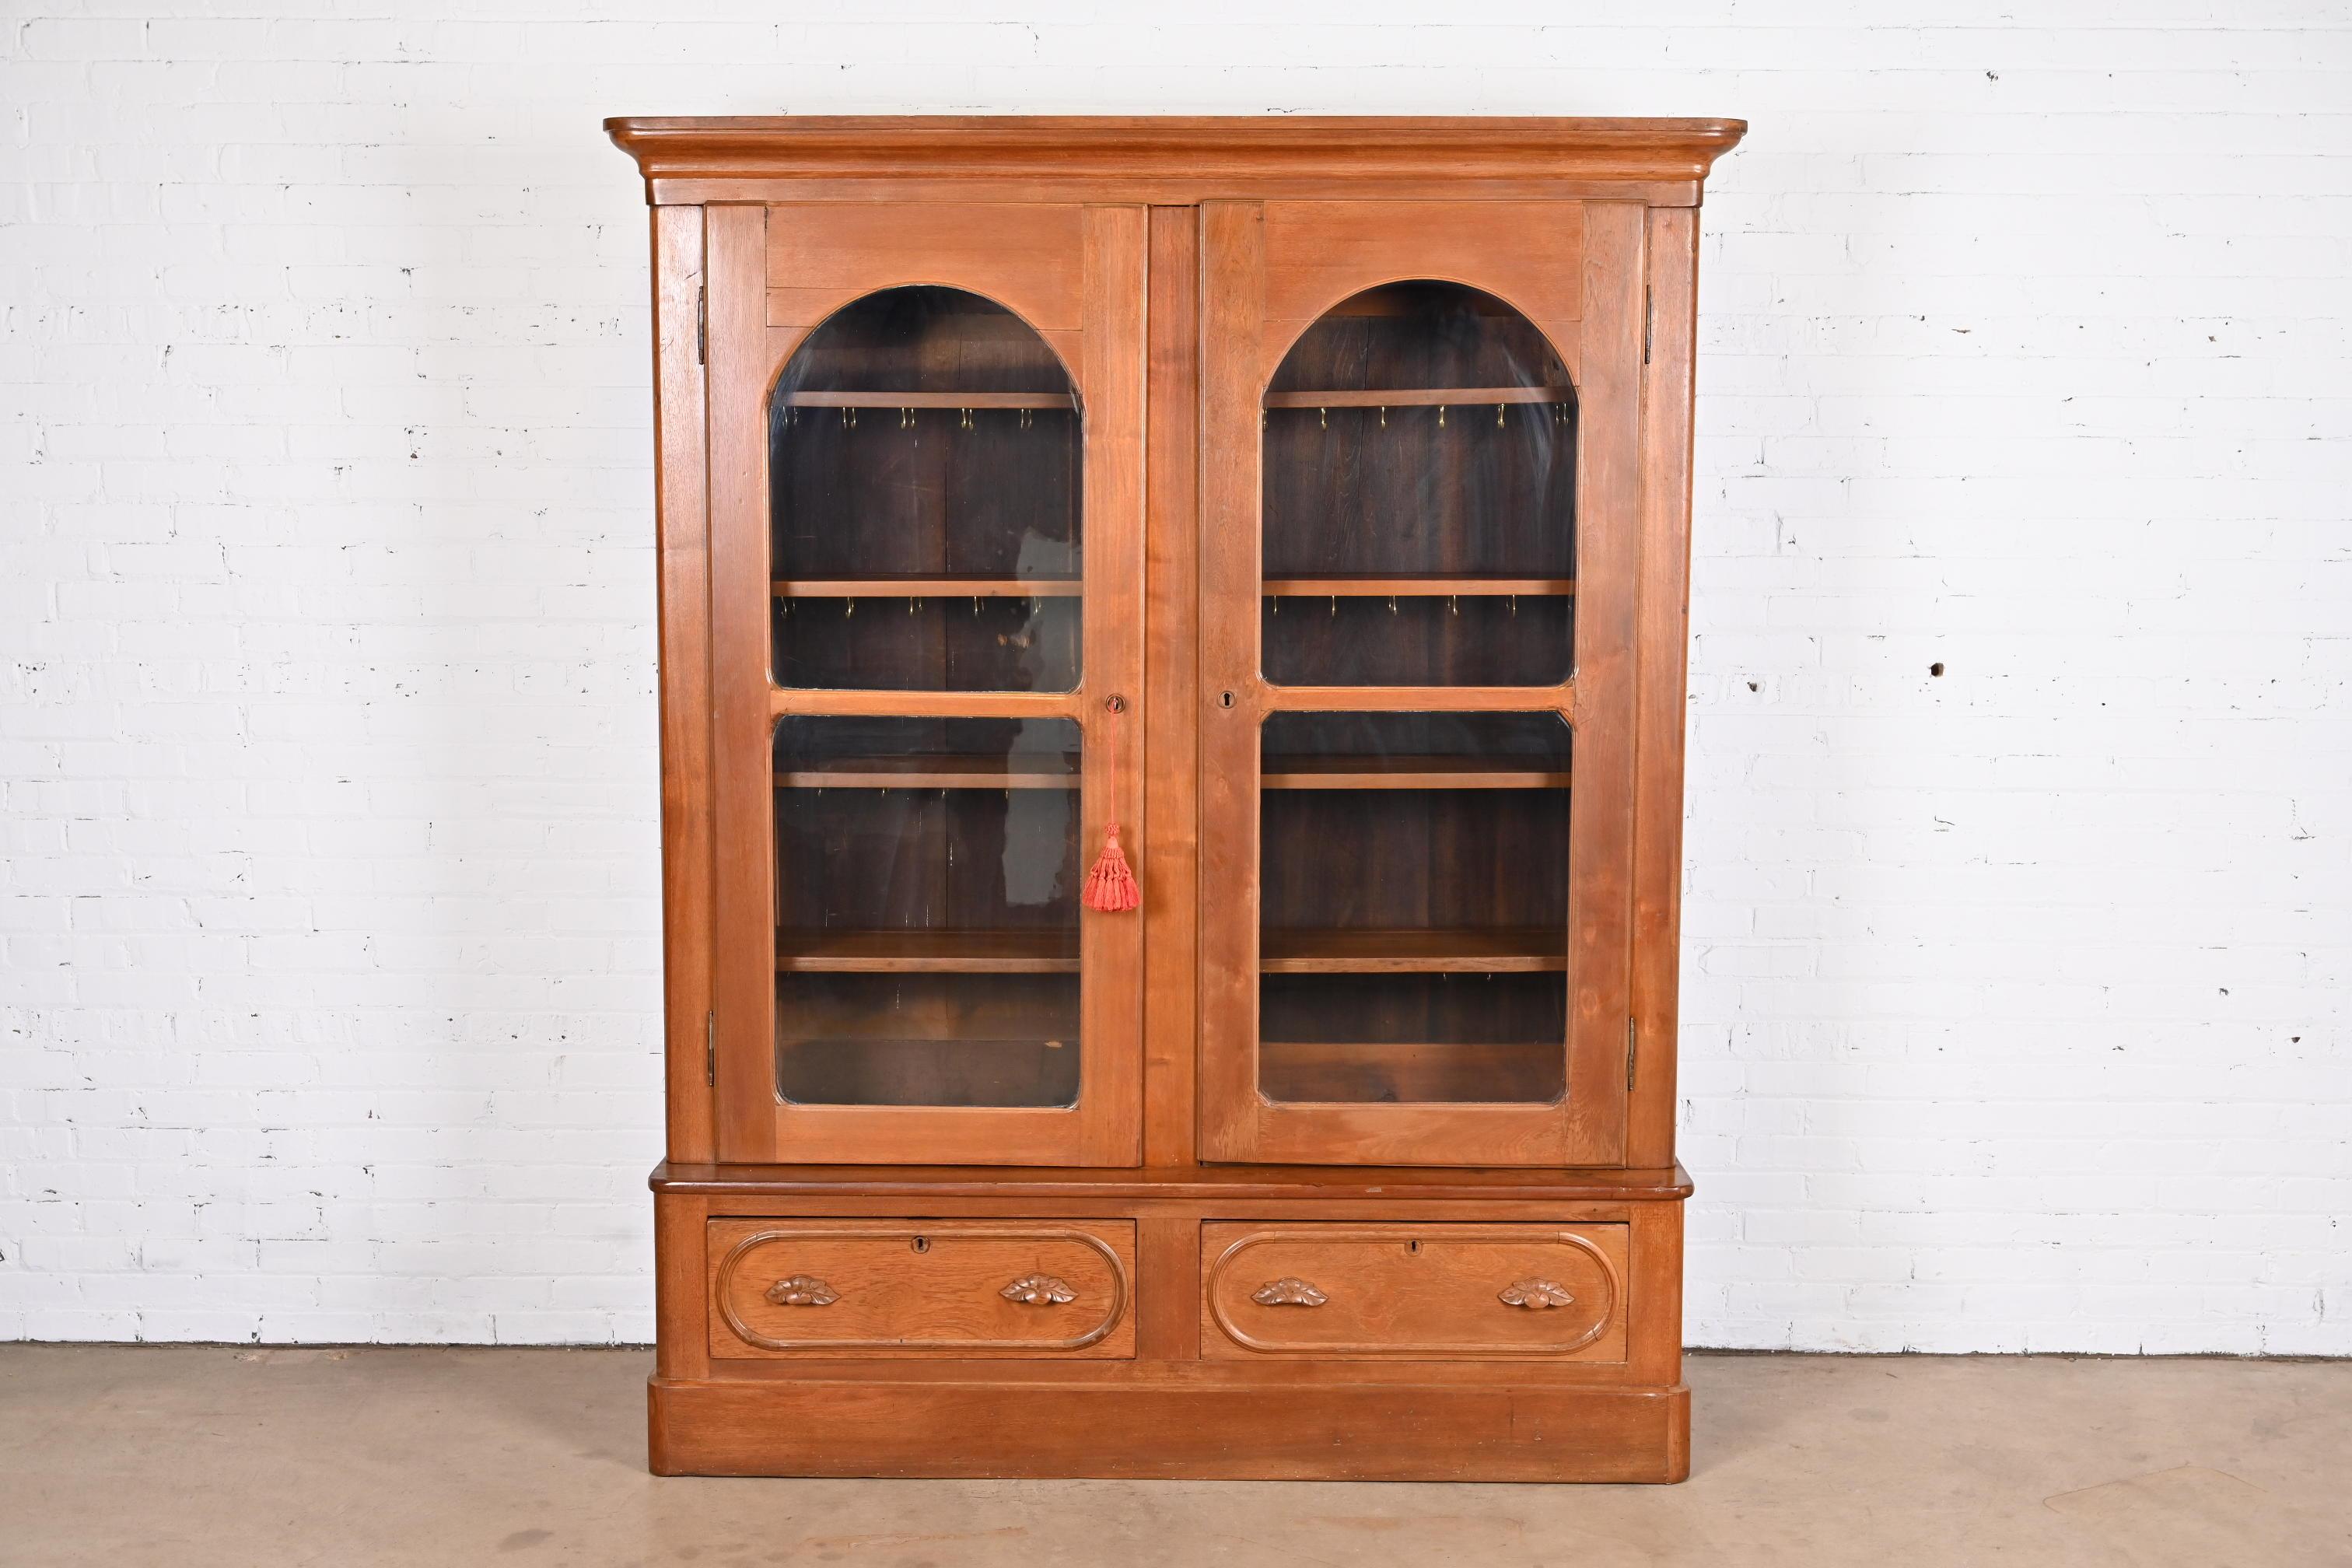 A beautiful antique Victorian knockdown double bookcase cabinet

USA, Circa 1880s

Carved solid walnut, with arched glass front doors.

Measures: 69